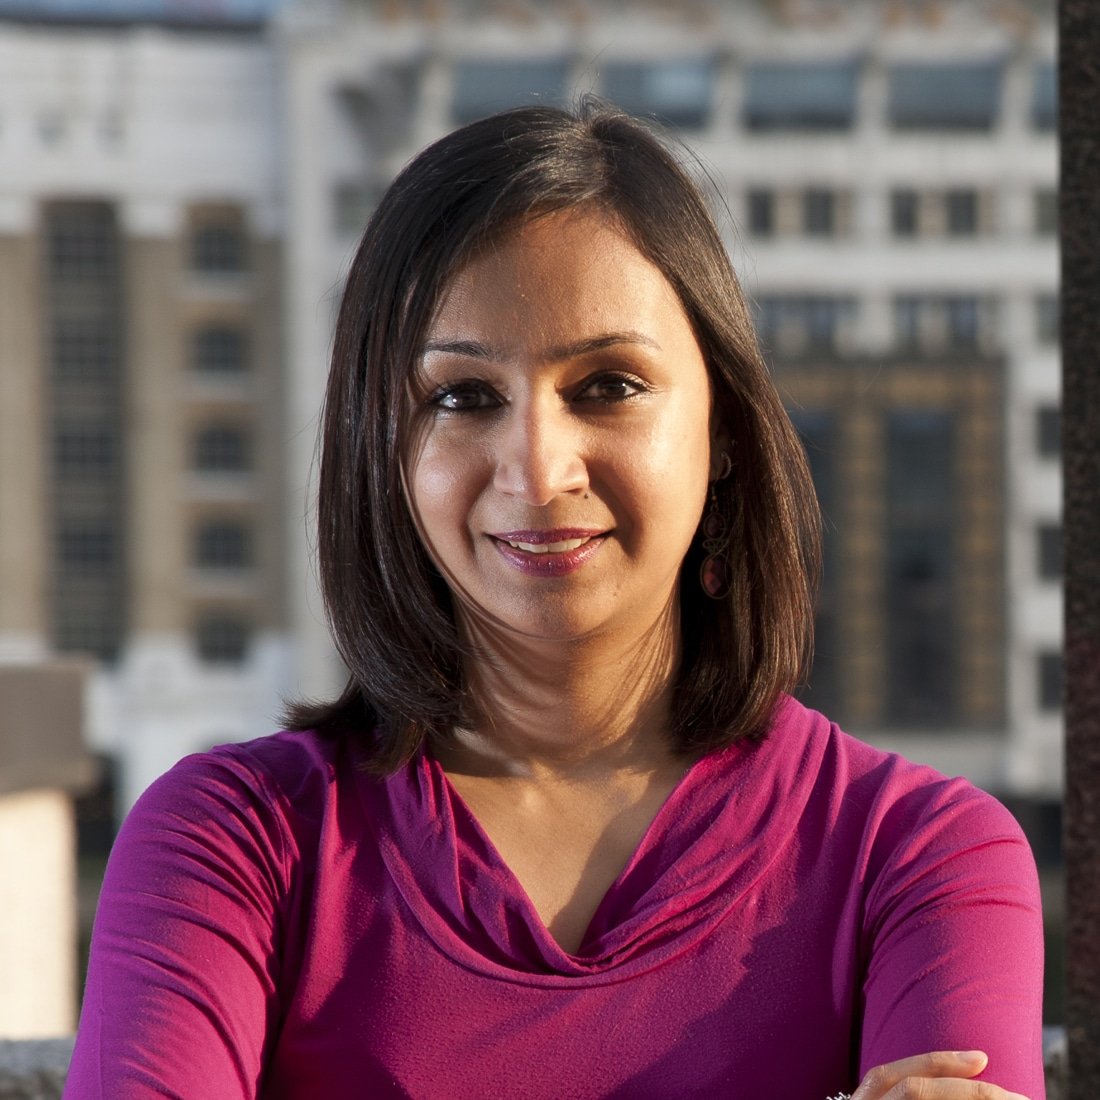 Roma-Agrawal-female-shard-structural-engineer-speaker-at-Great-British-Speakers